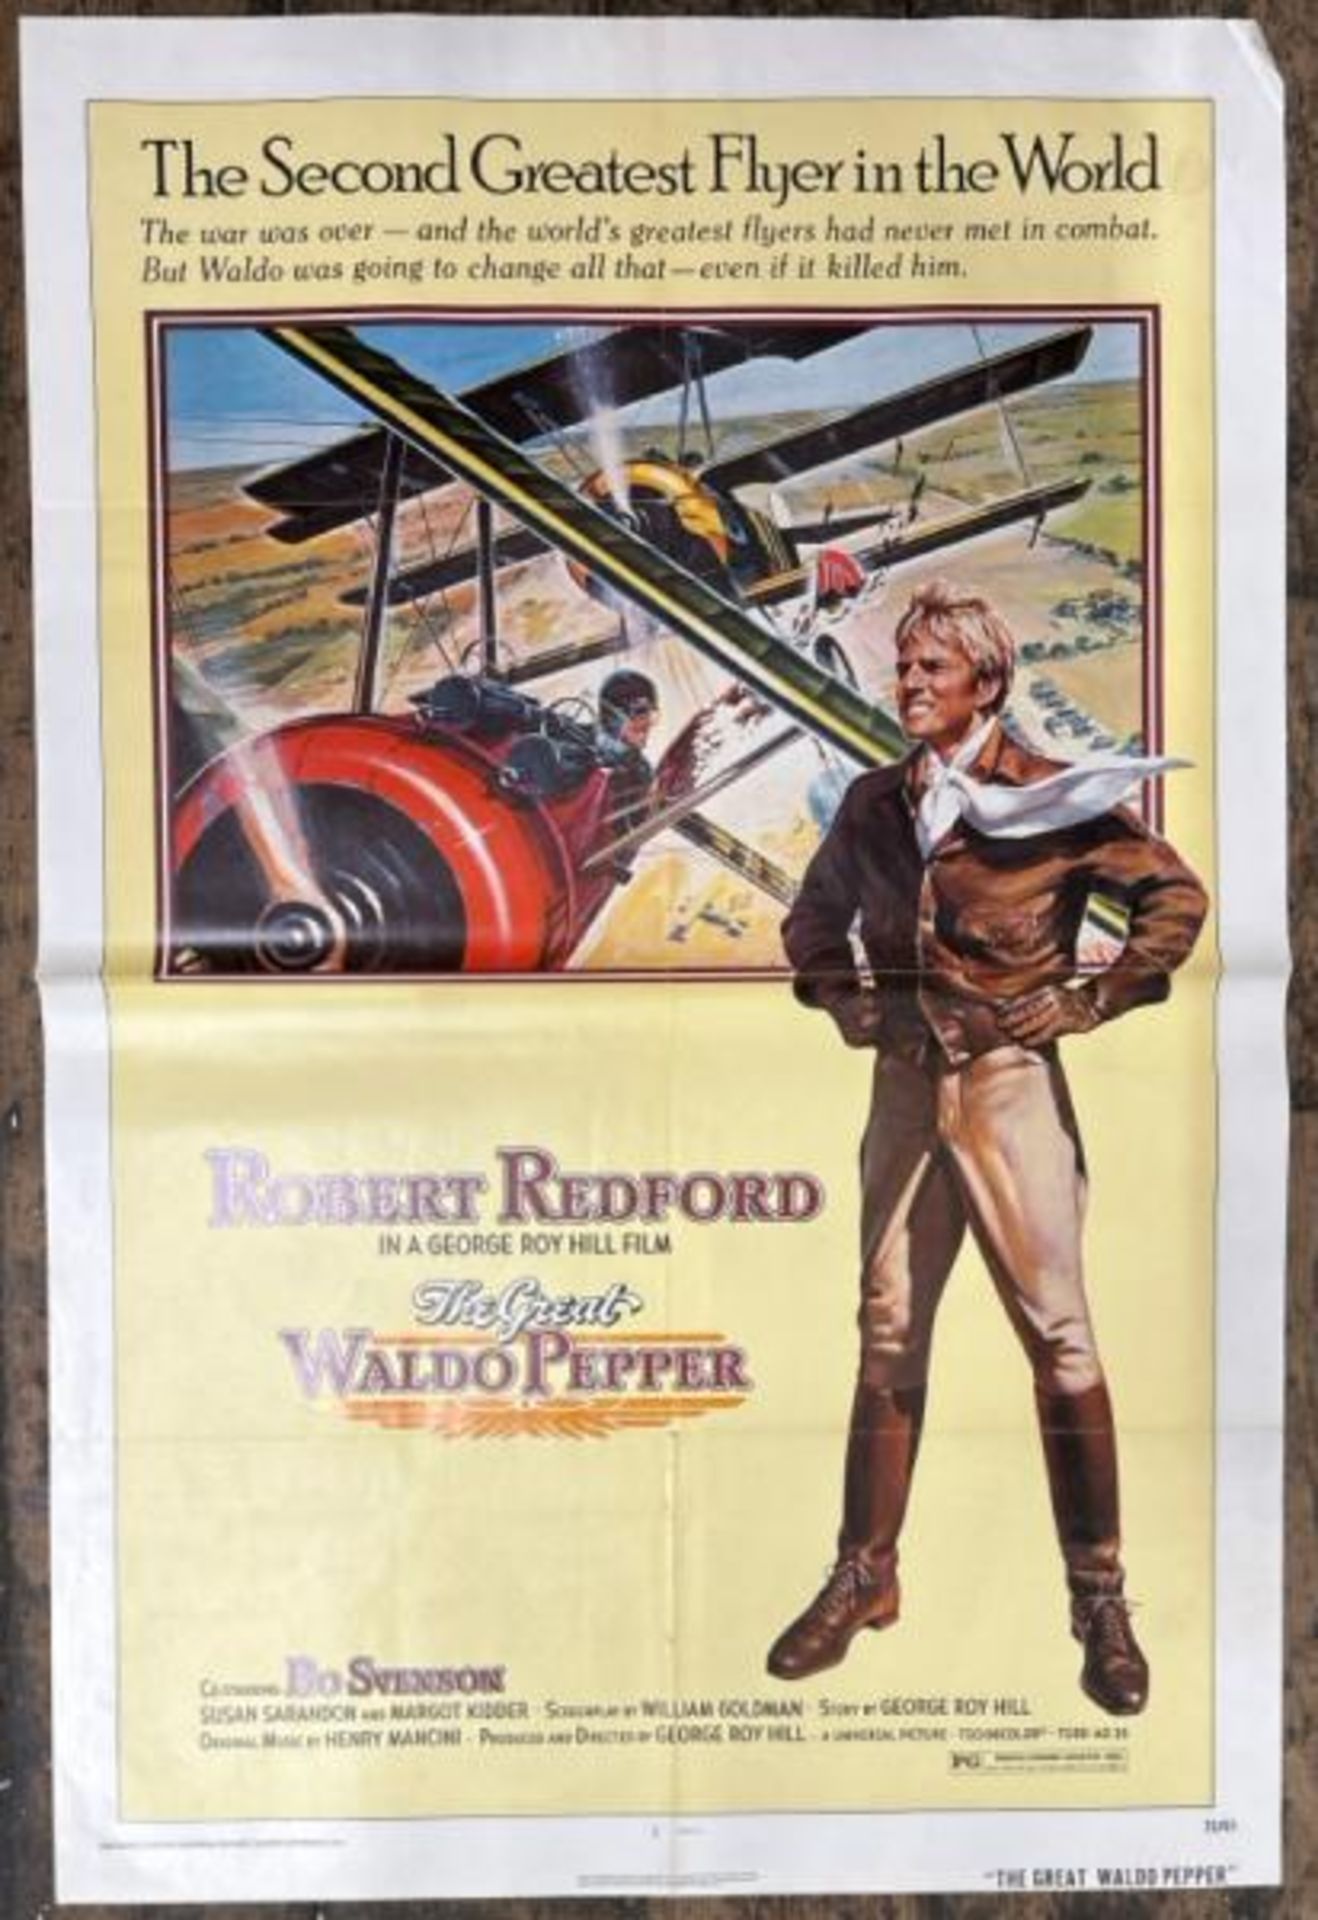 THE GREAT VALDO PEPPER, THE SECOND GREATEST FLYER IN THE WORLD STARRING ROBERT REDFORD, ORIGINAL